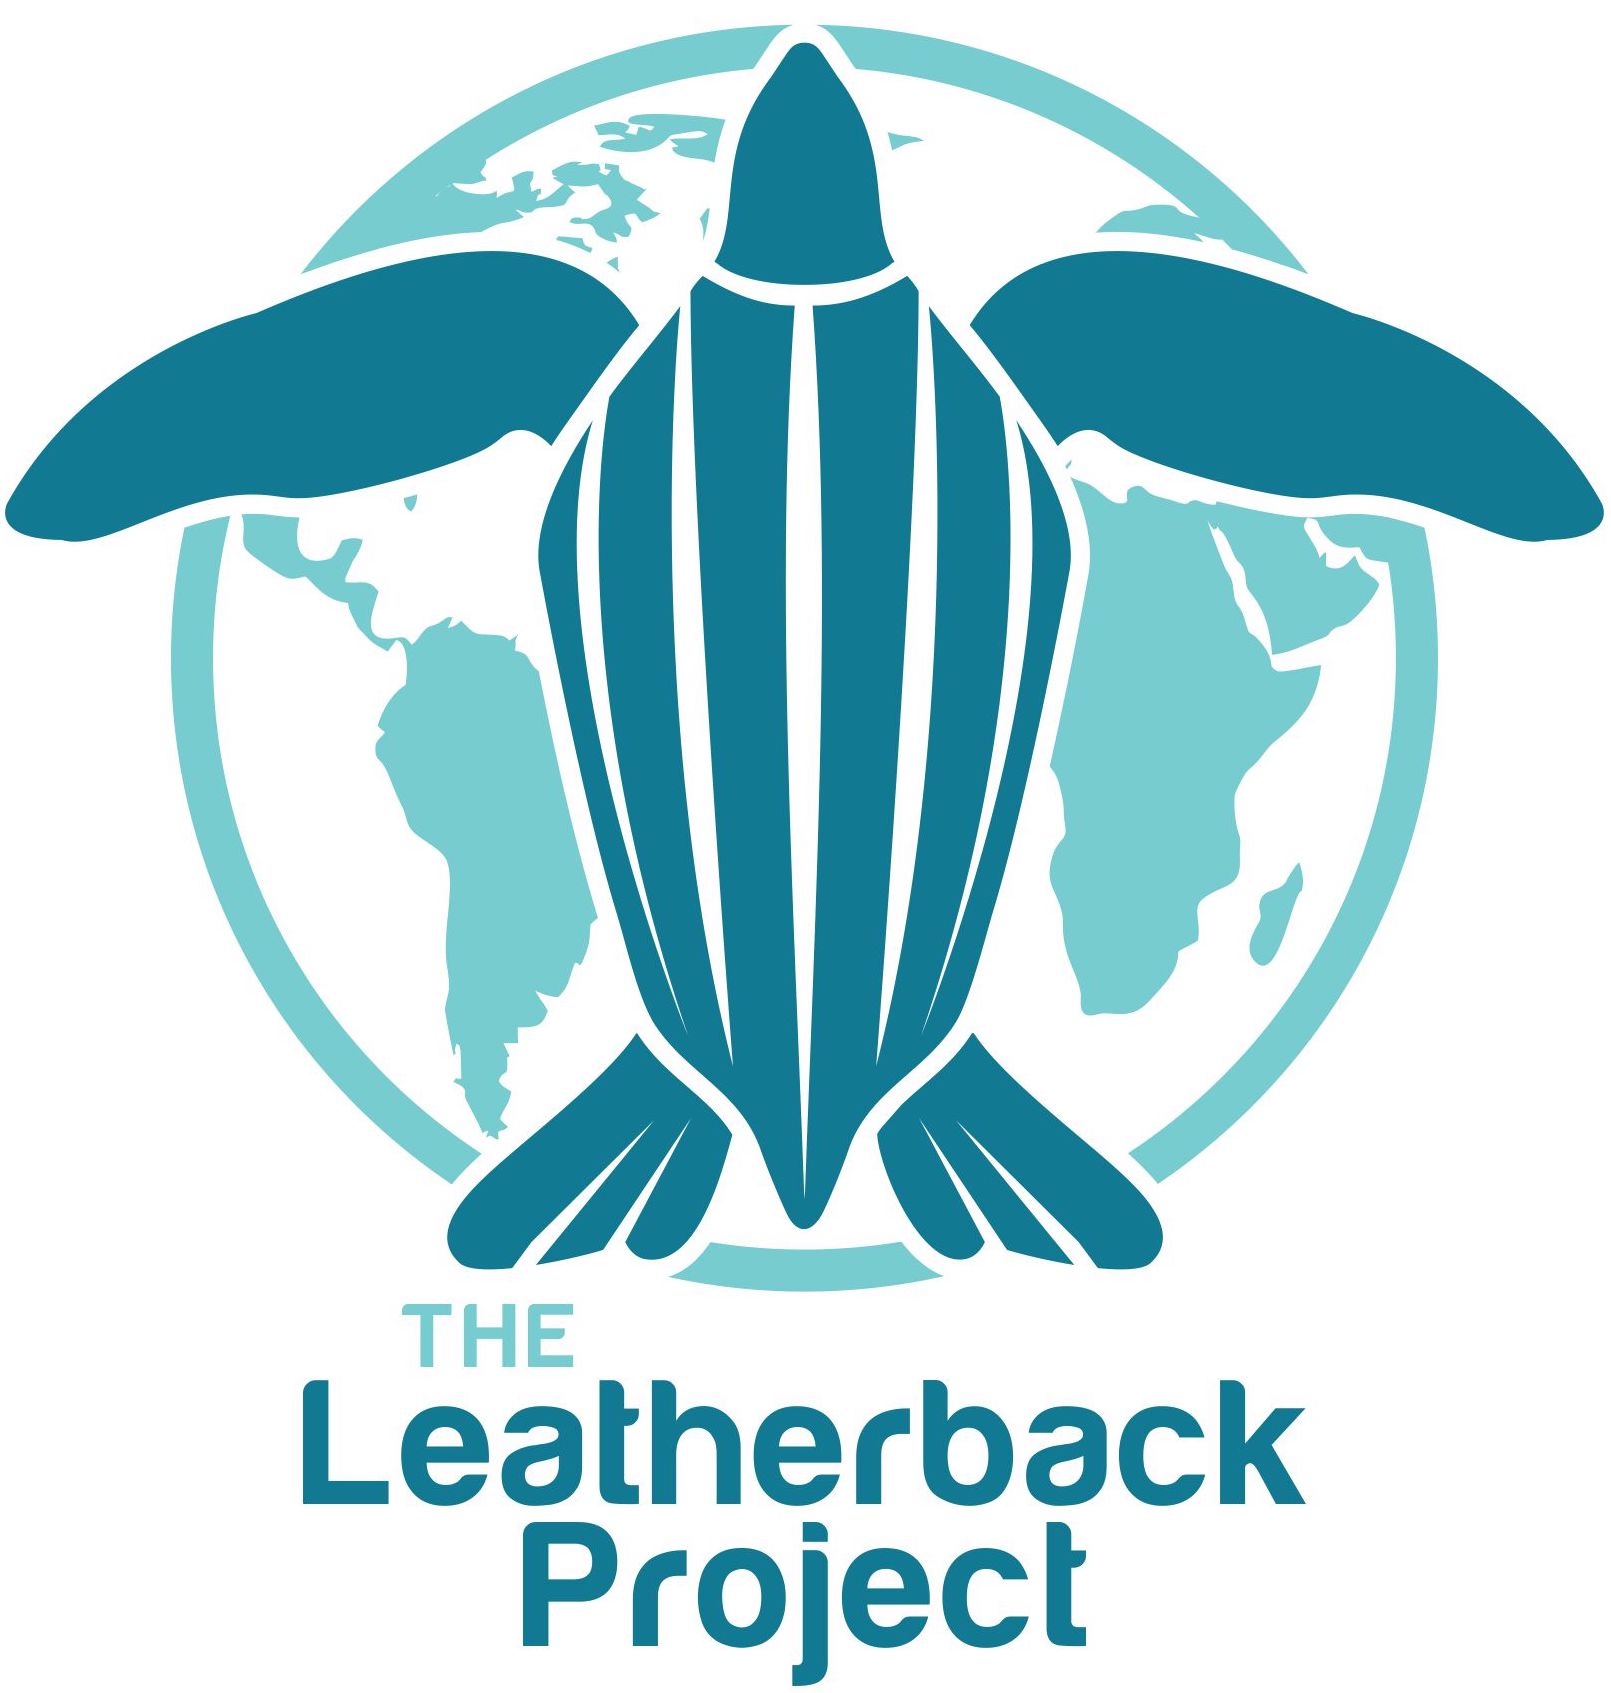 The Leatherback Project logo